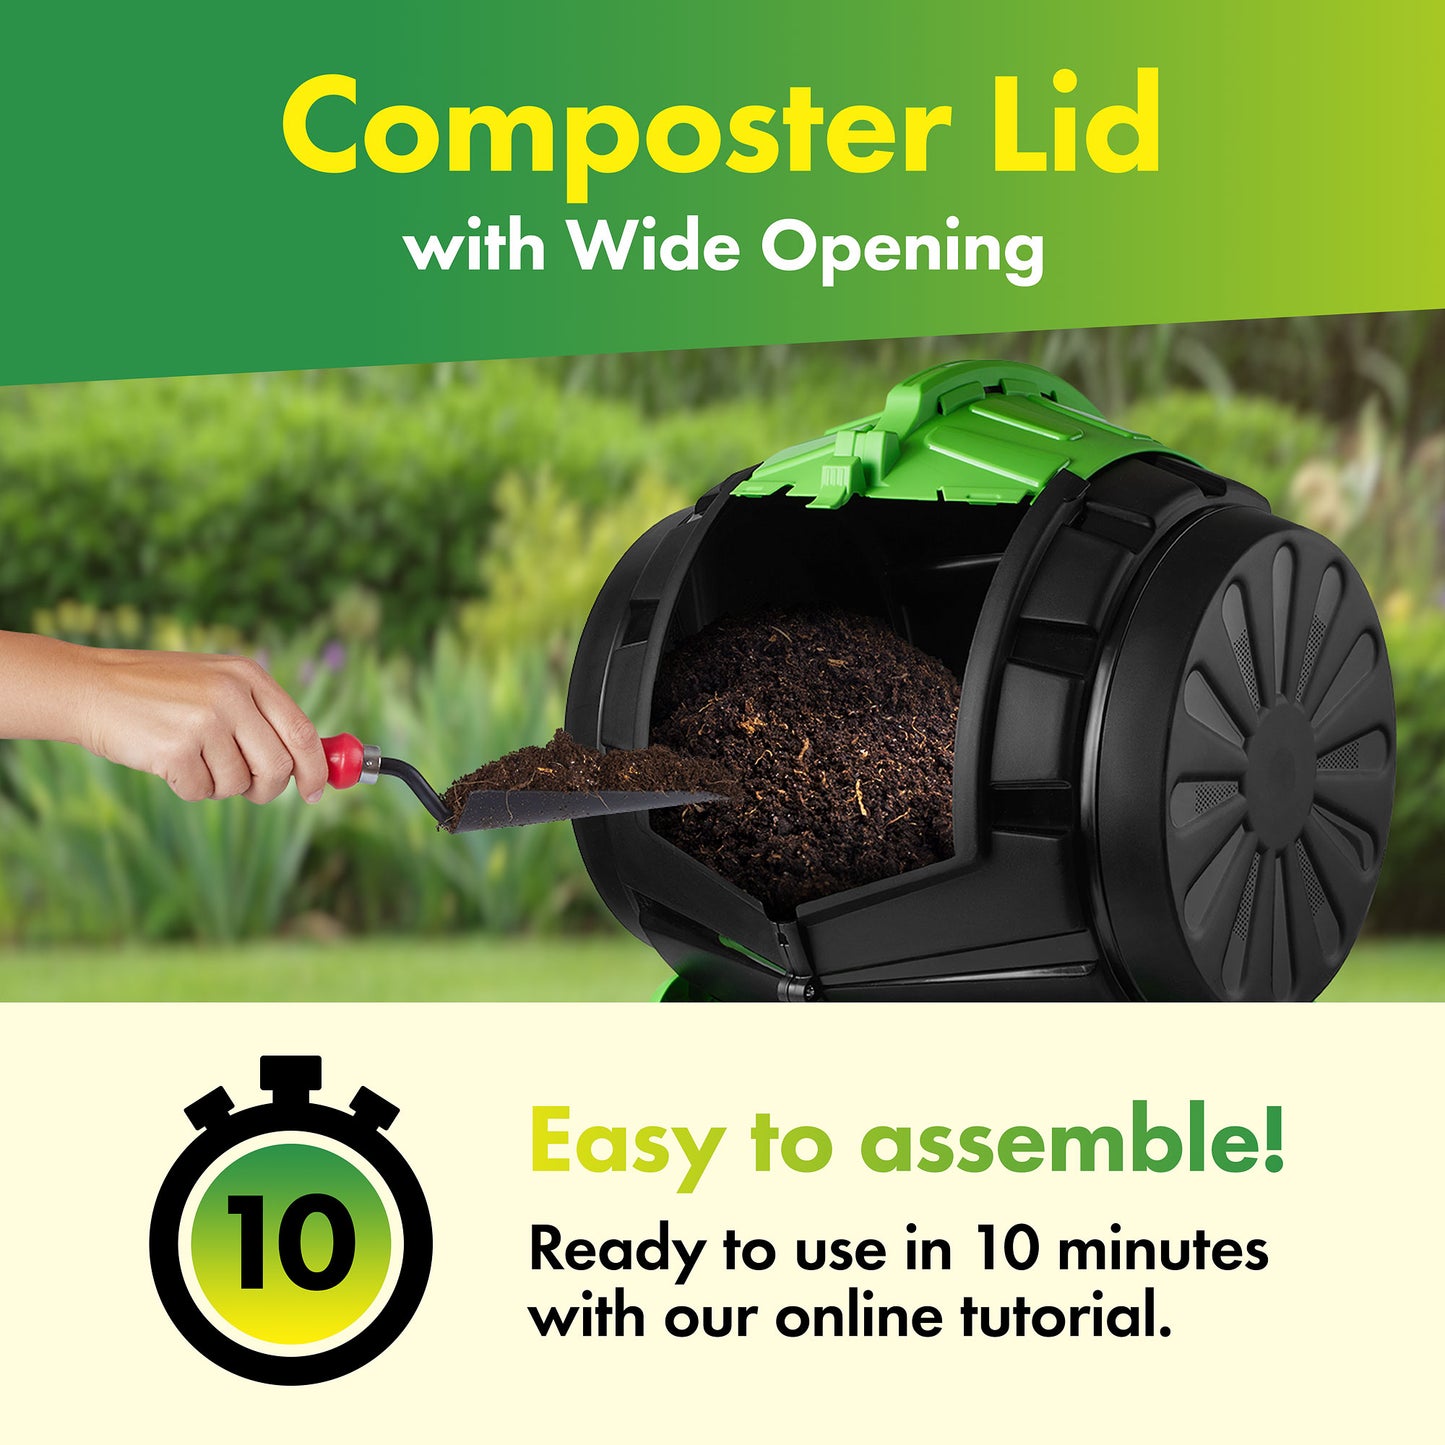 Pack of Two 50 Litre Tumbling Barrel Composter Bin With Liquid Collection Drawer